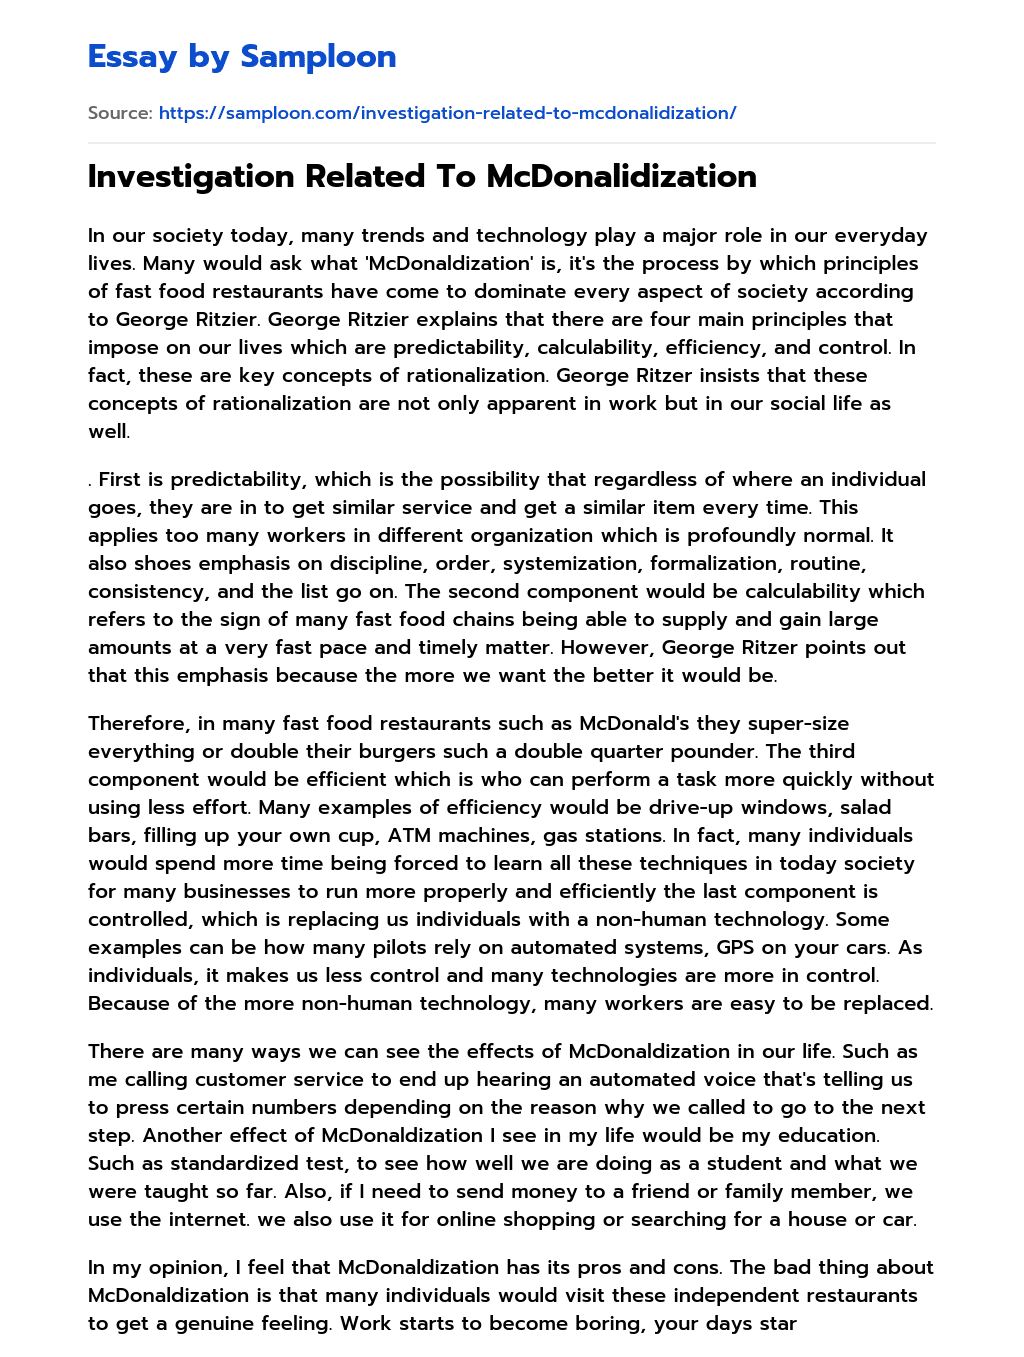 Investigation Related To McDonalidization essay